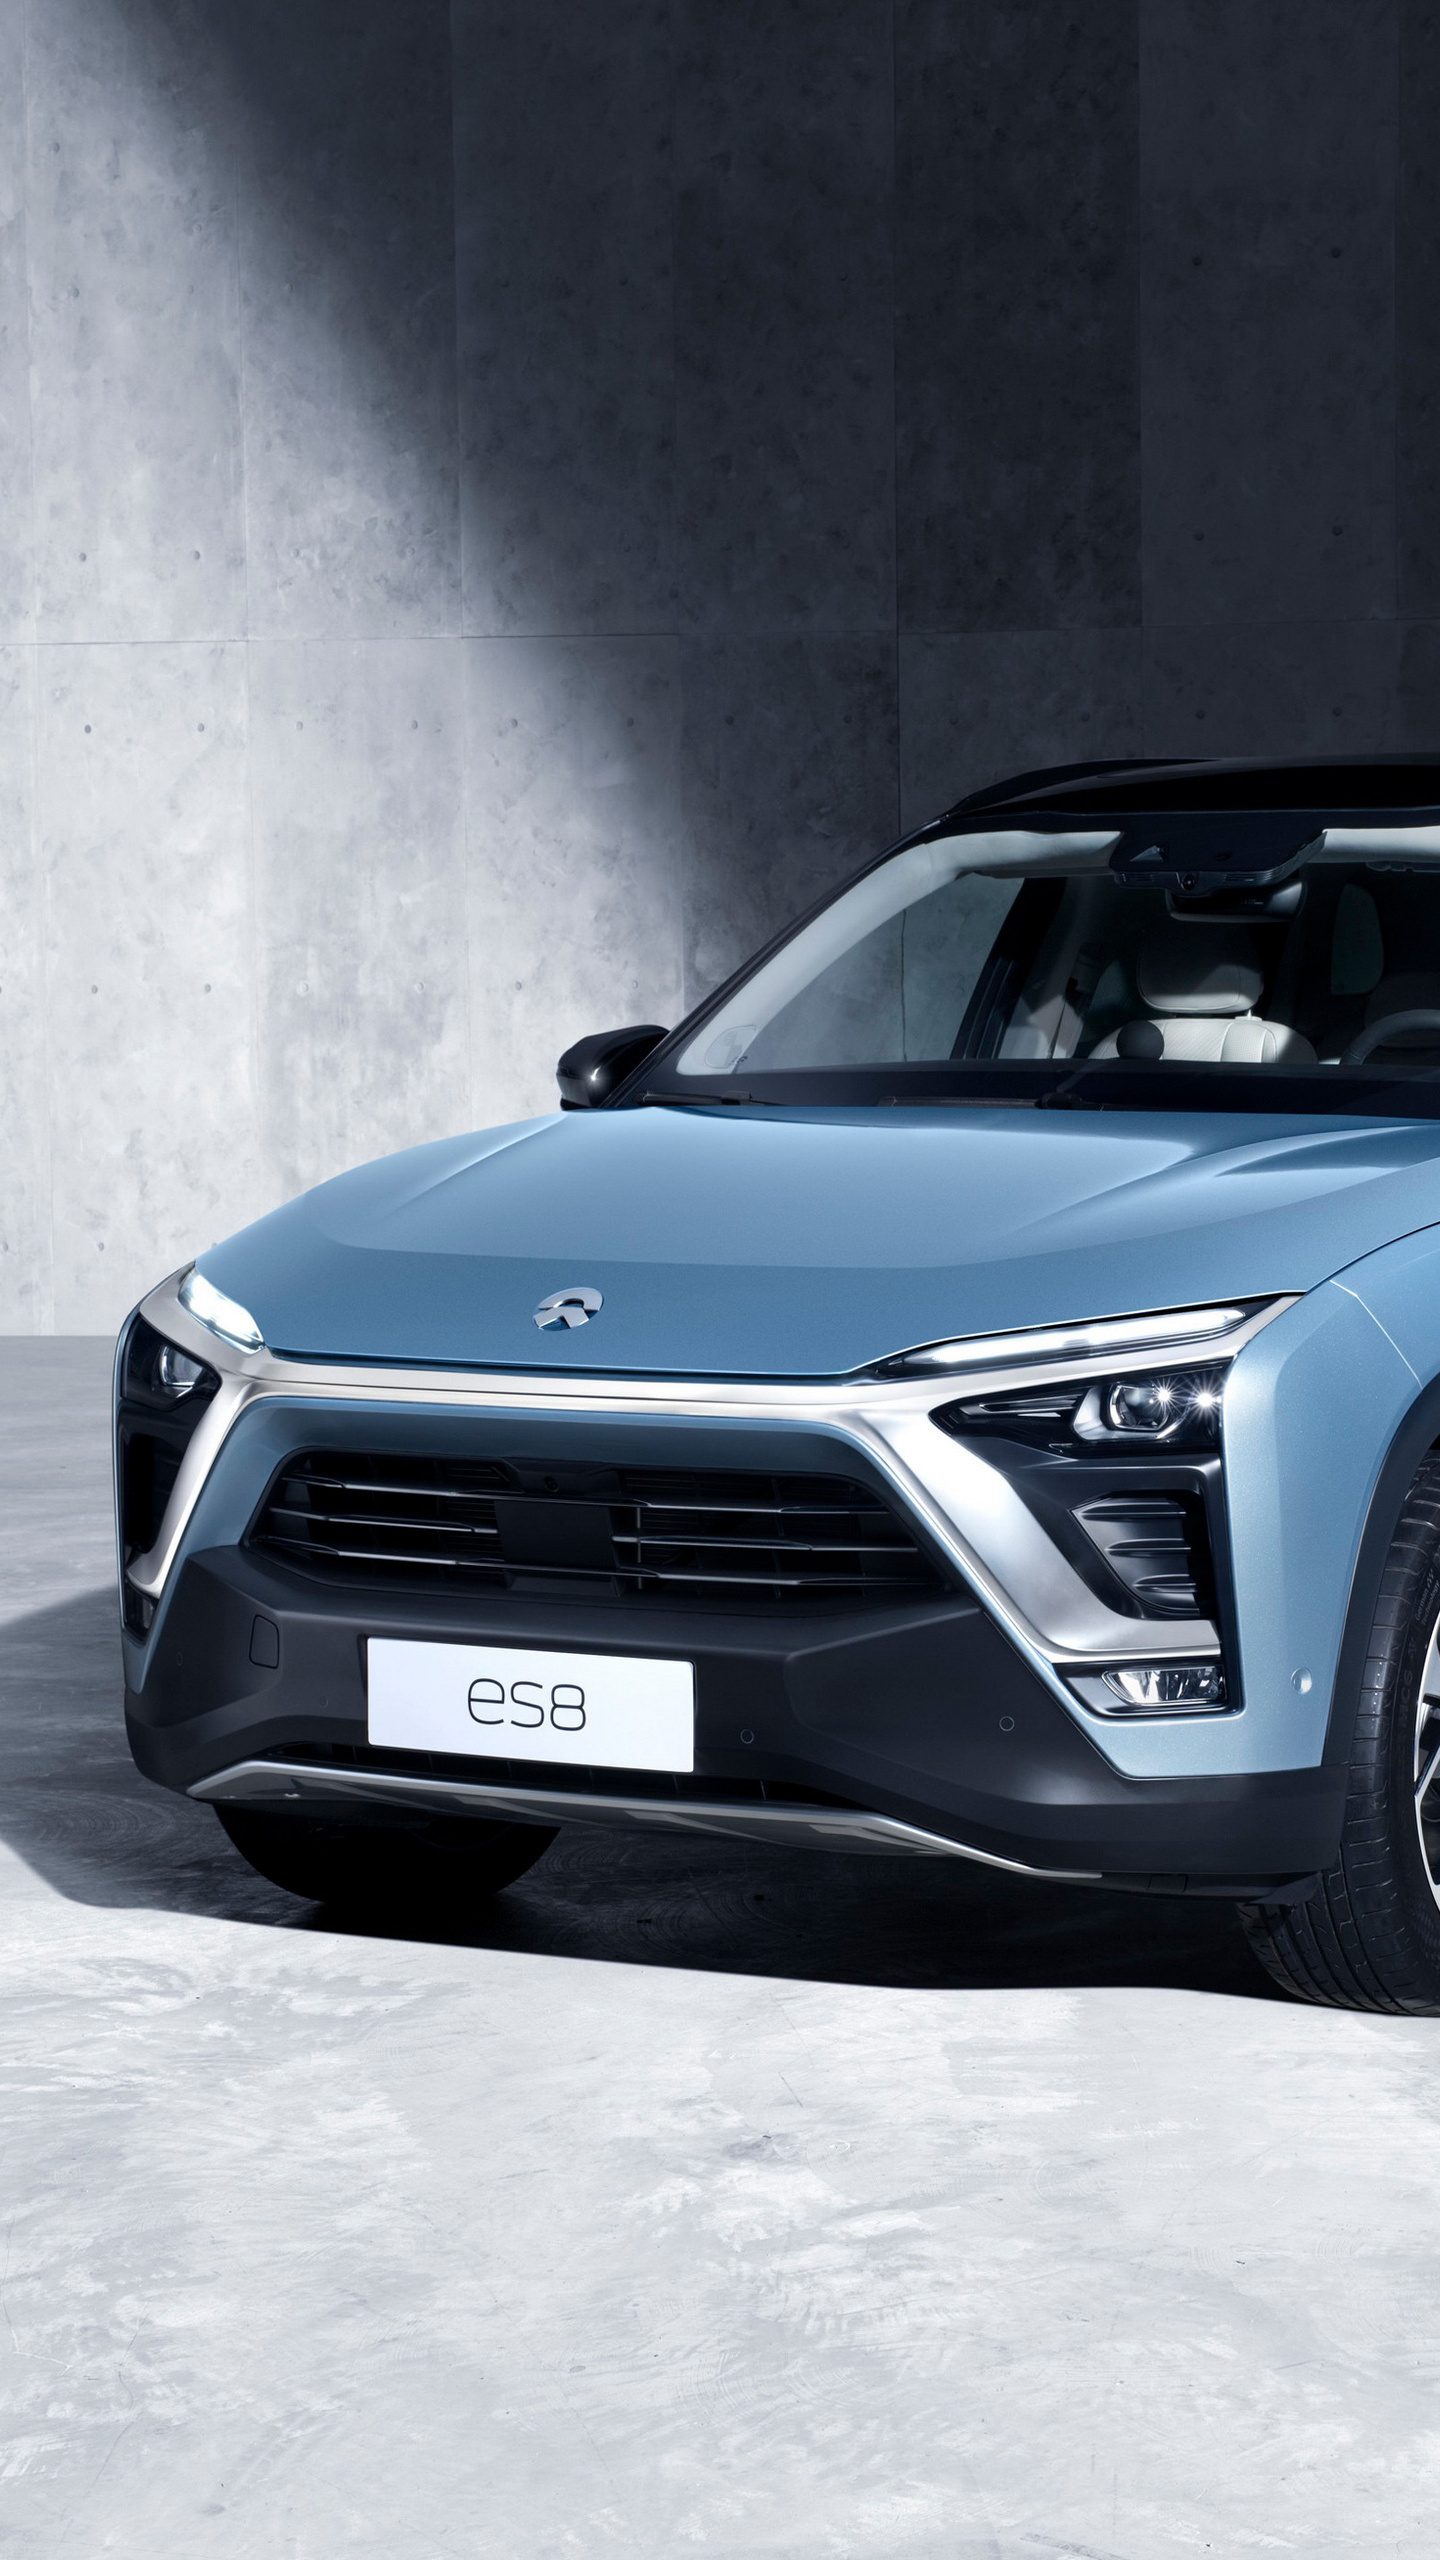 NIO Auto, ES8 electric SUV, High-quality wallpapers, HD and 4K images, 1440x2560 HD Phone